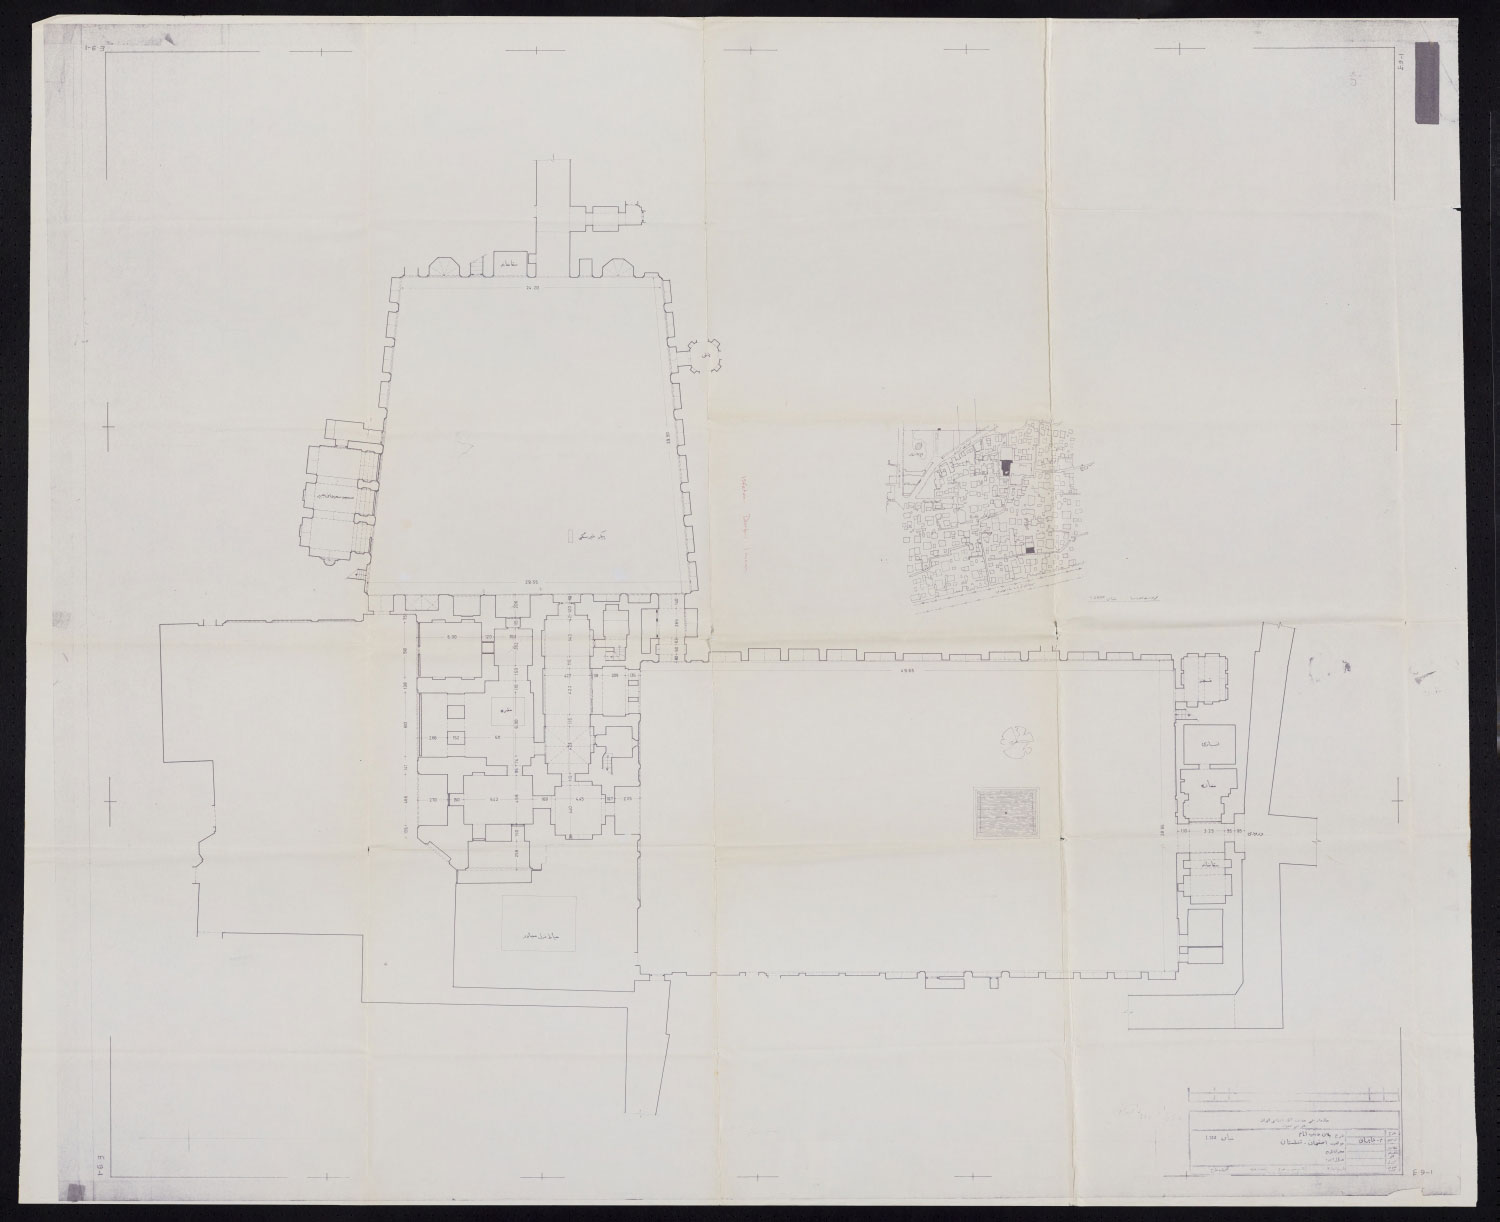 Darb-i Imam - Plan of complex, with drawing of location in surrounding neighborhood (Dardasht).